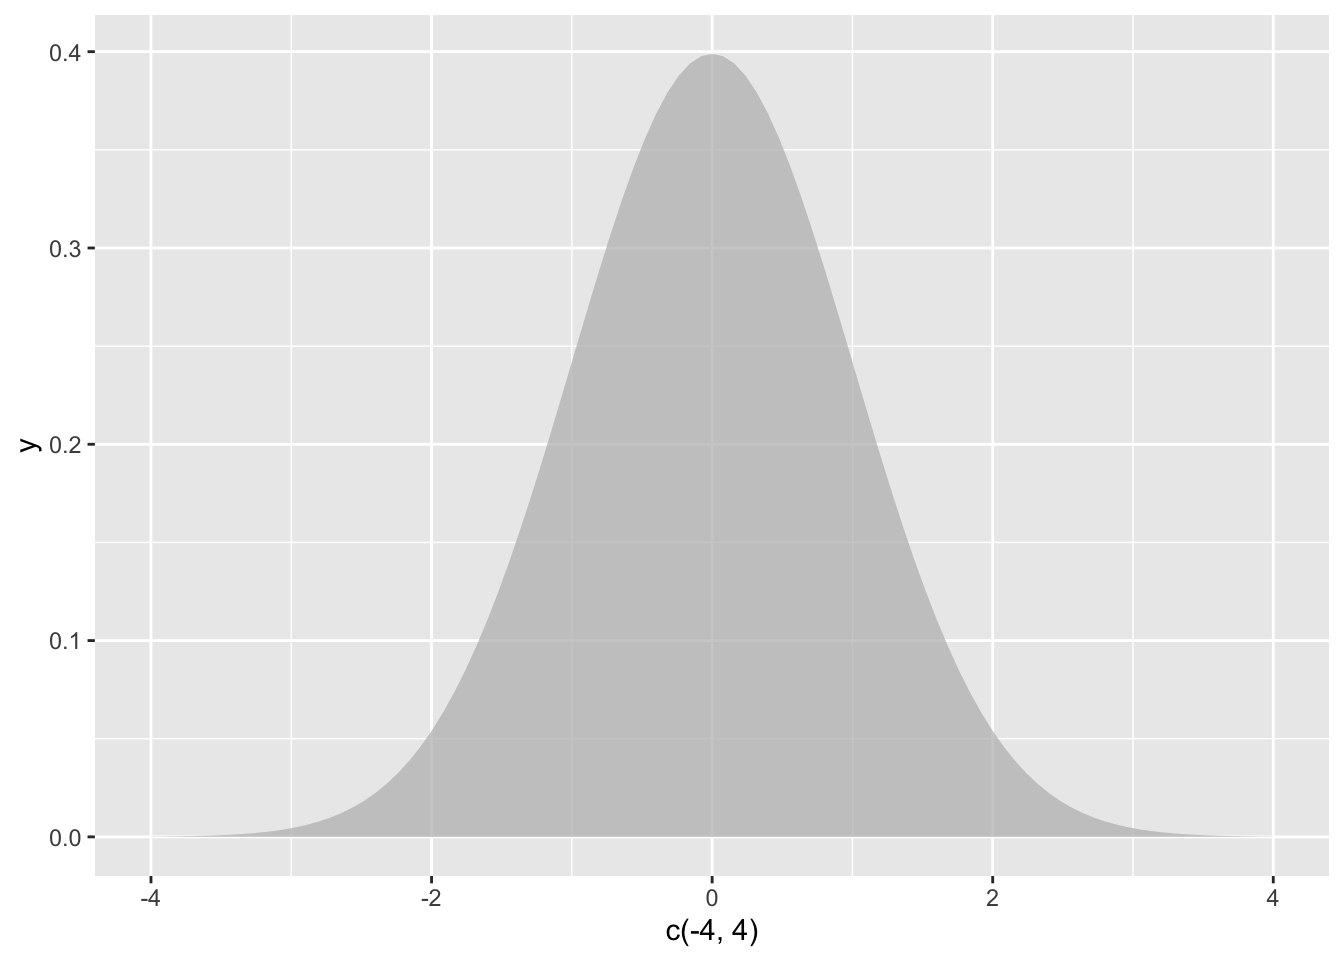 The null hypothesis distribution of $z$